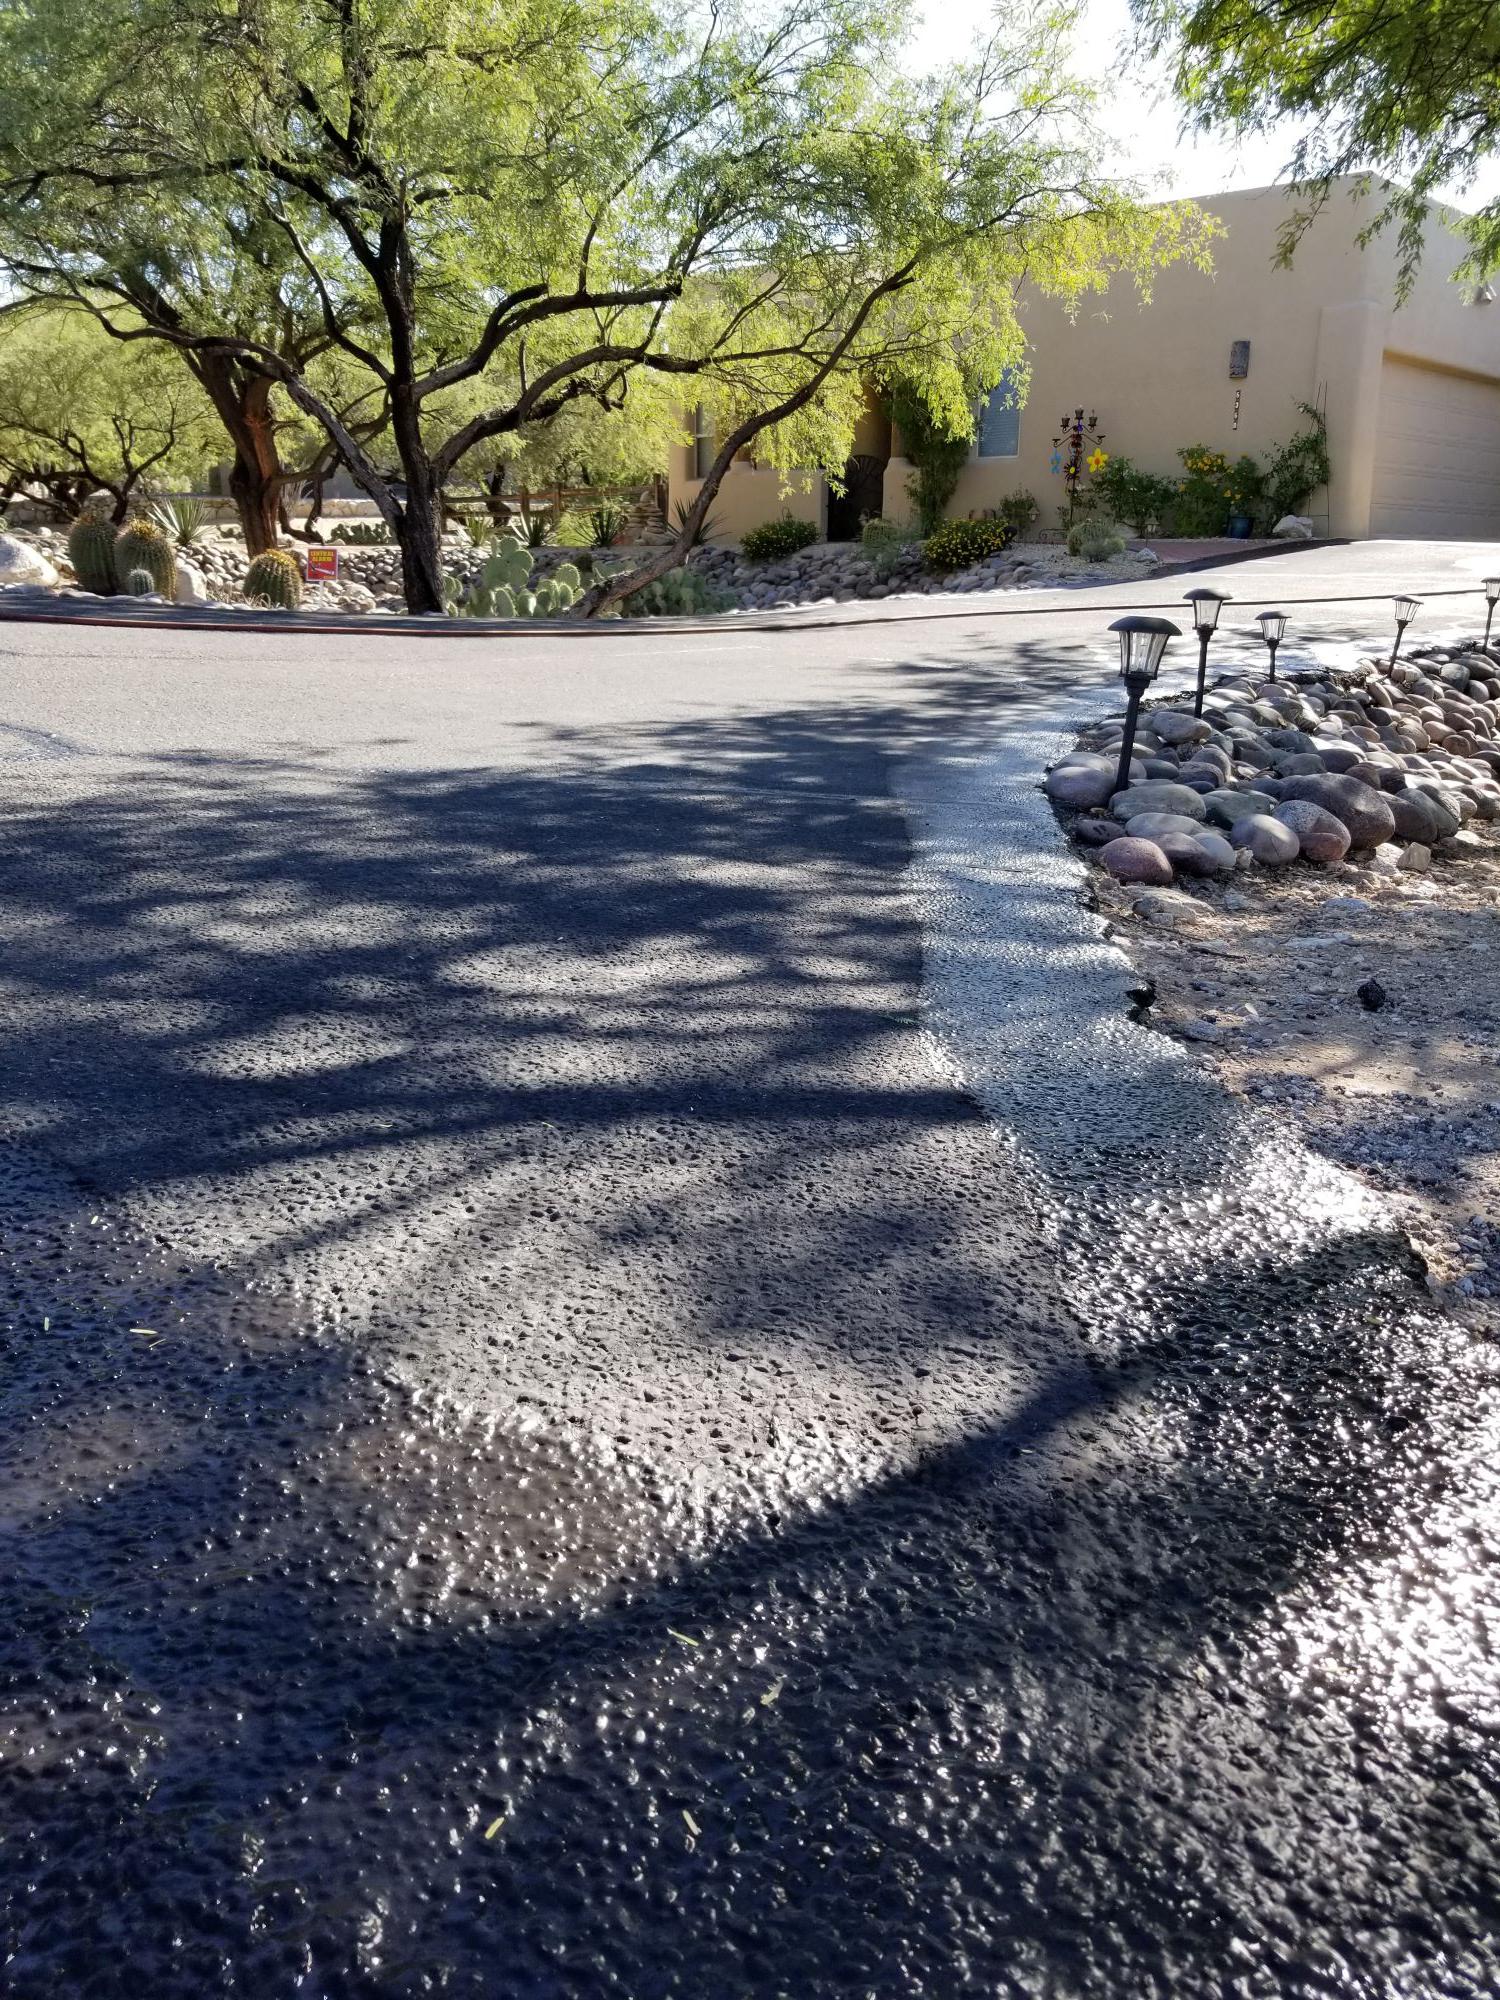 Pro Asphalt & Sealcoating, LLC is your trusted partner for Asphalt Repair in Tucson, AZ. Our skilled technicians tackle a variety of asphalt issues, from cracks and damage to deterioration. We take pride in restoring the functionality and appearance of your asphalt surfaces with precision and quality materials